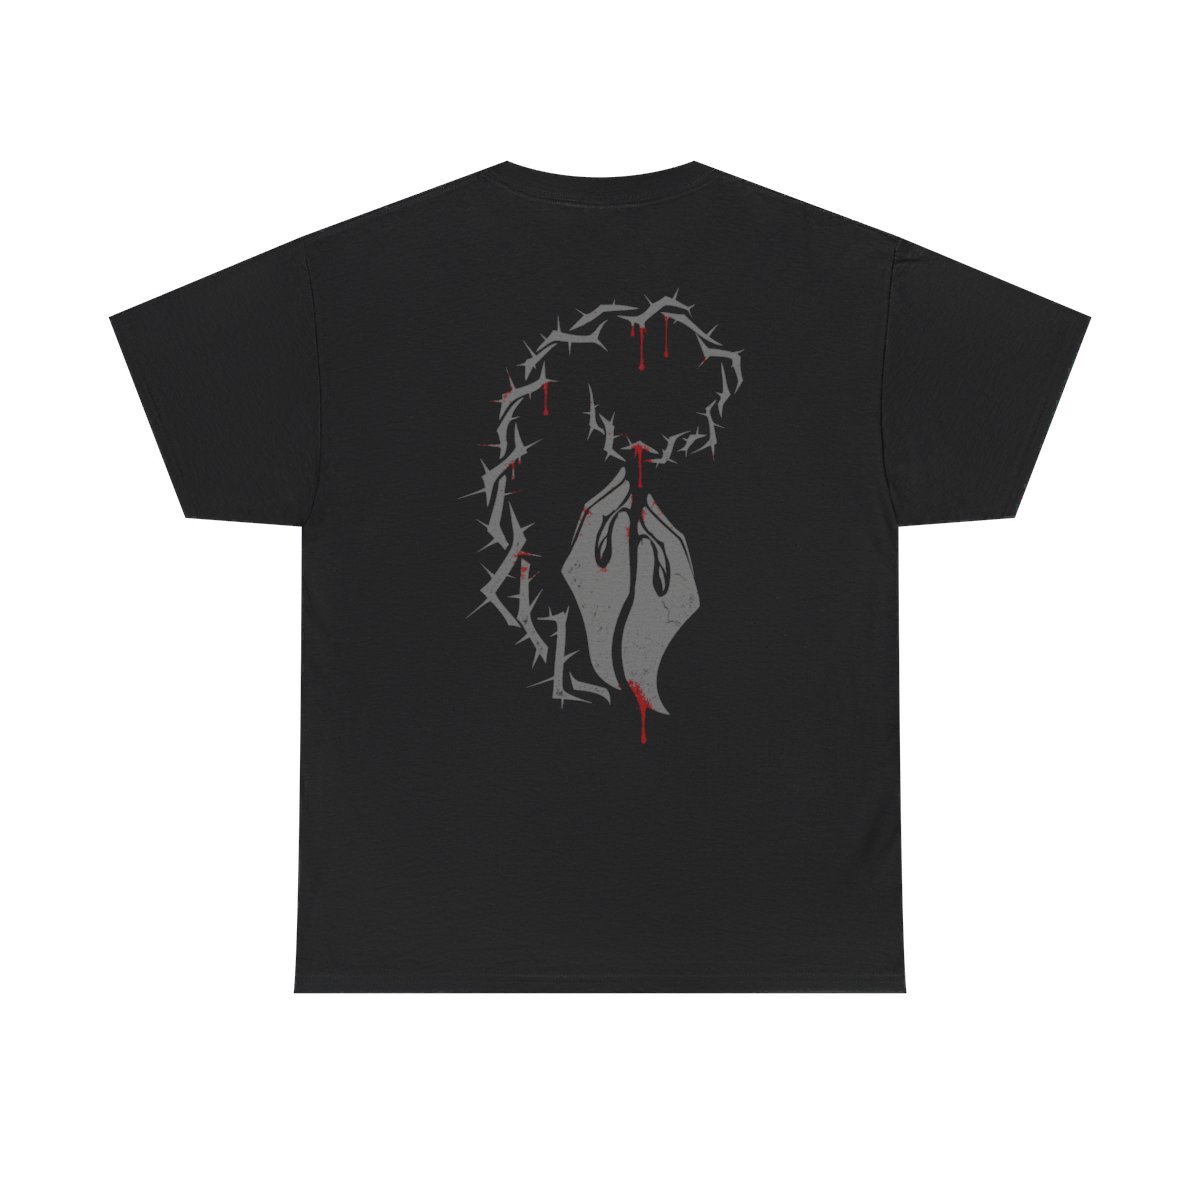 Blood on Our Hands Short Sleeve Tshirt (Meltdown) (2-Sided)